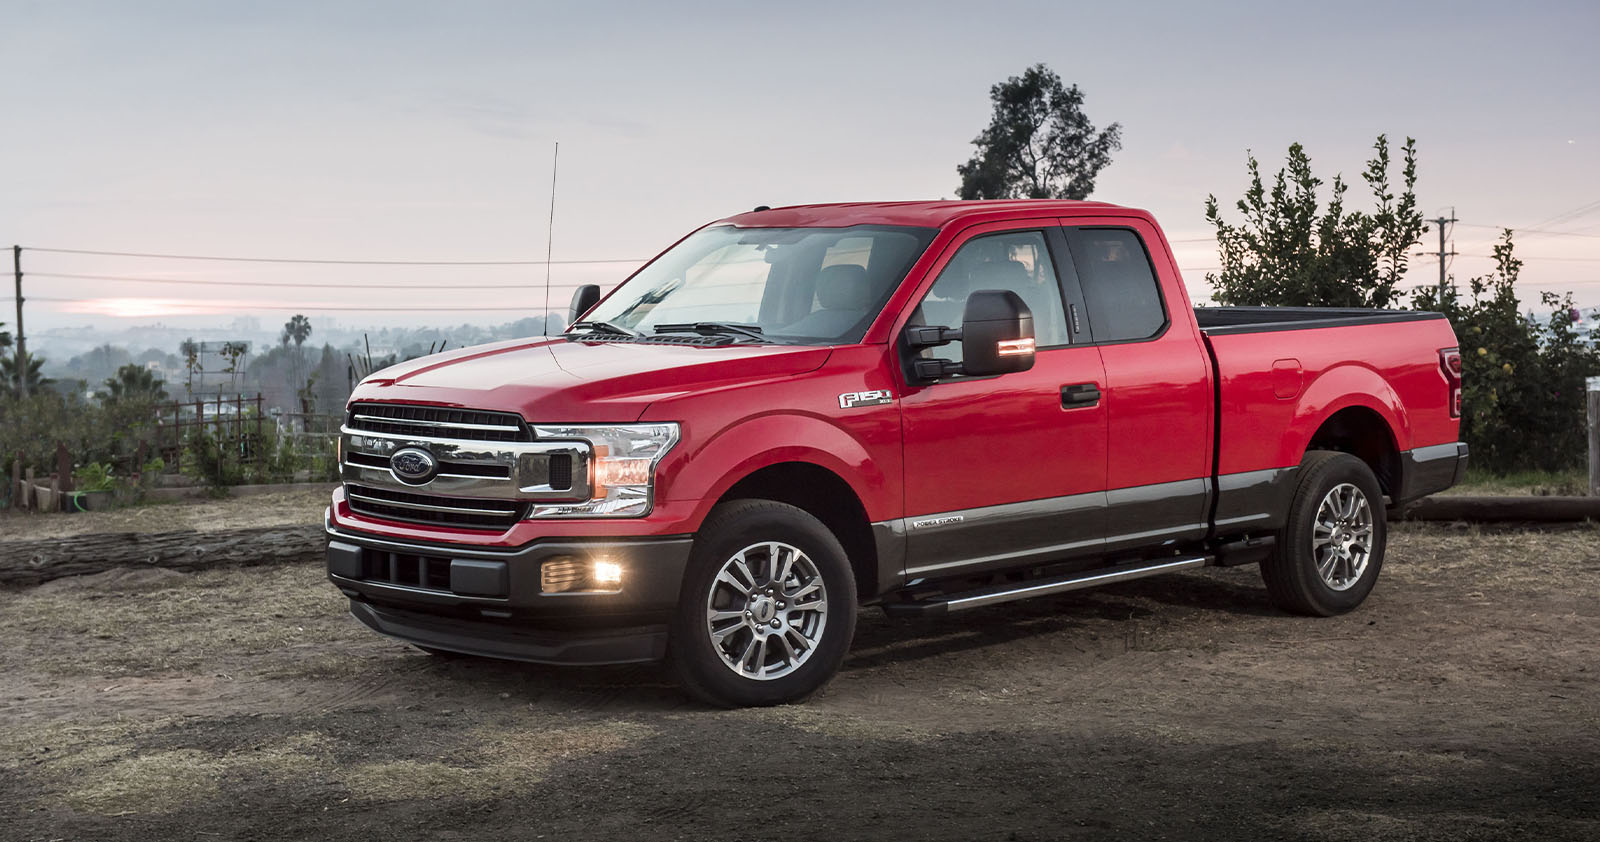 2018 Red Ford F-150 Power Stroke extended cab pickup